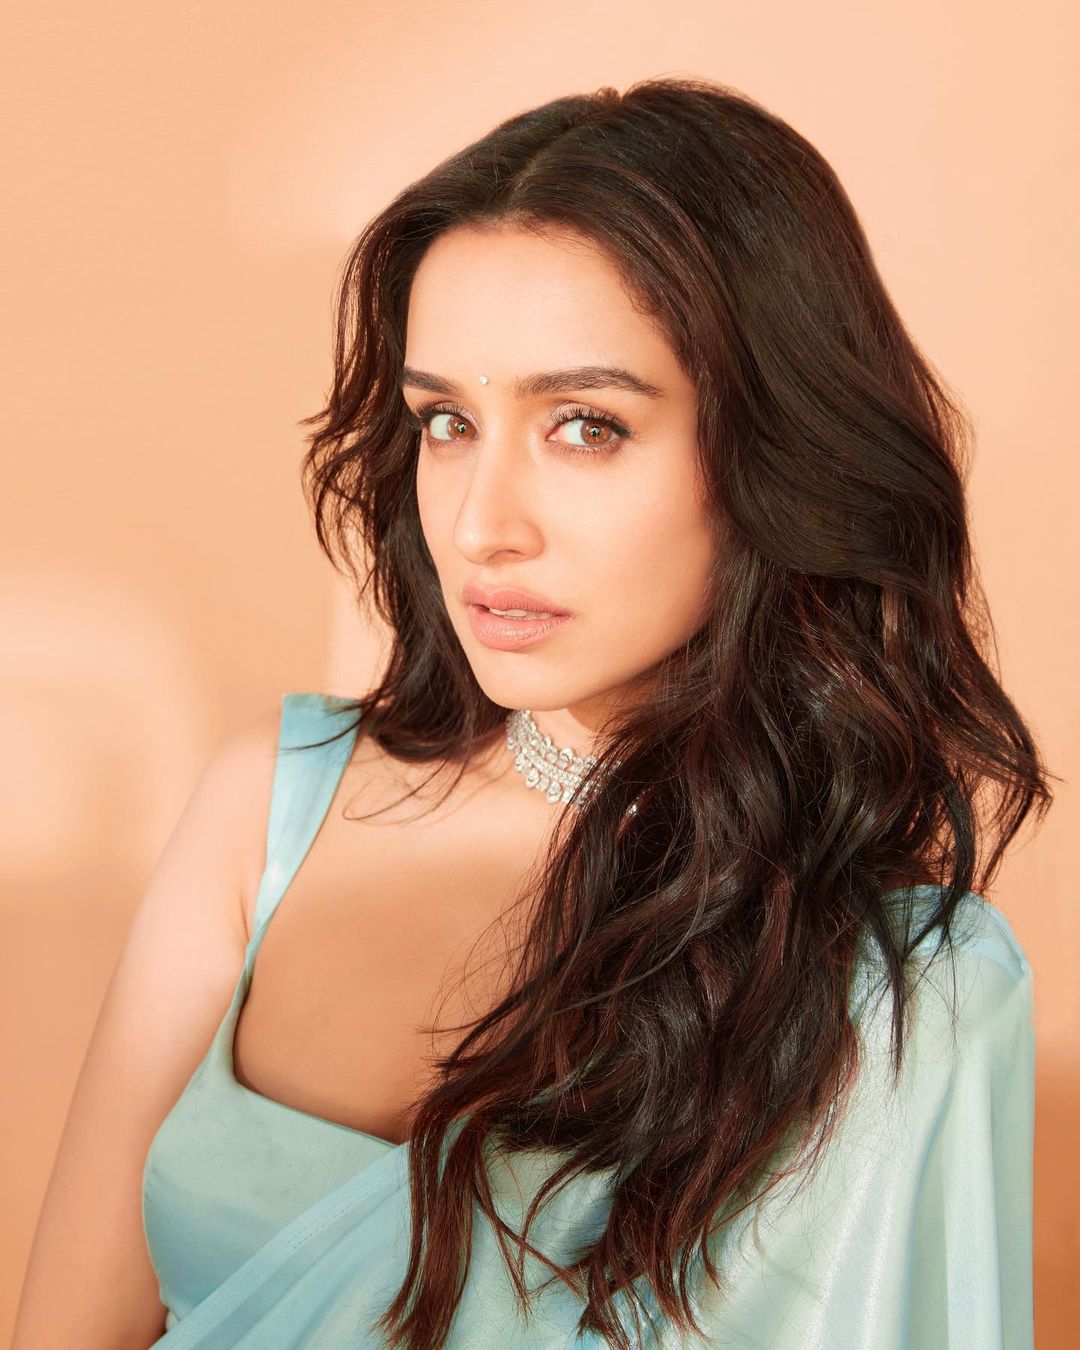 What! Shraddha Kapoor said she would never marry someone who doesn't love Vada Pav